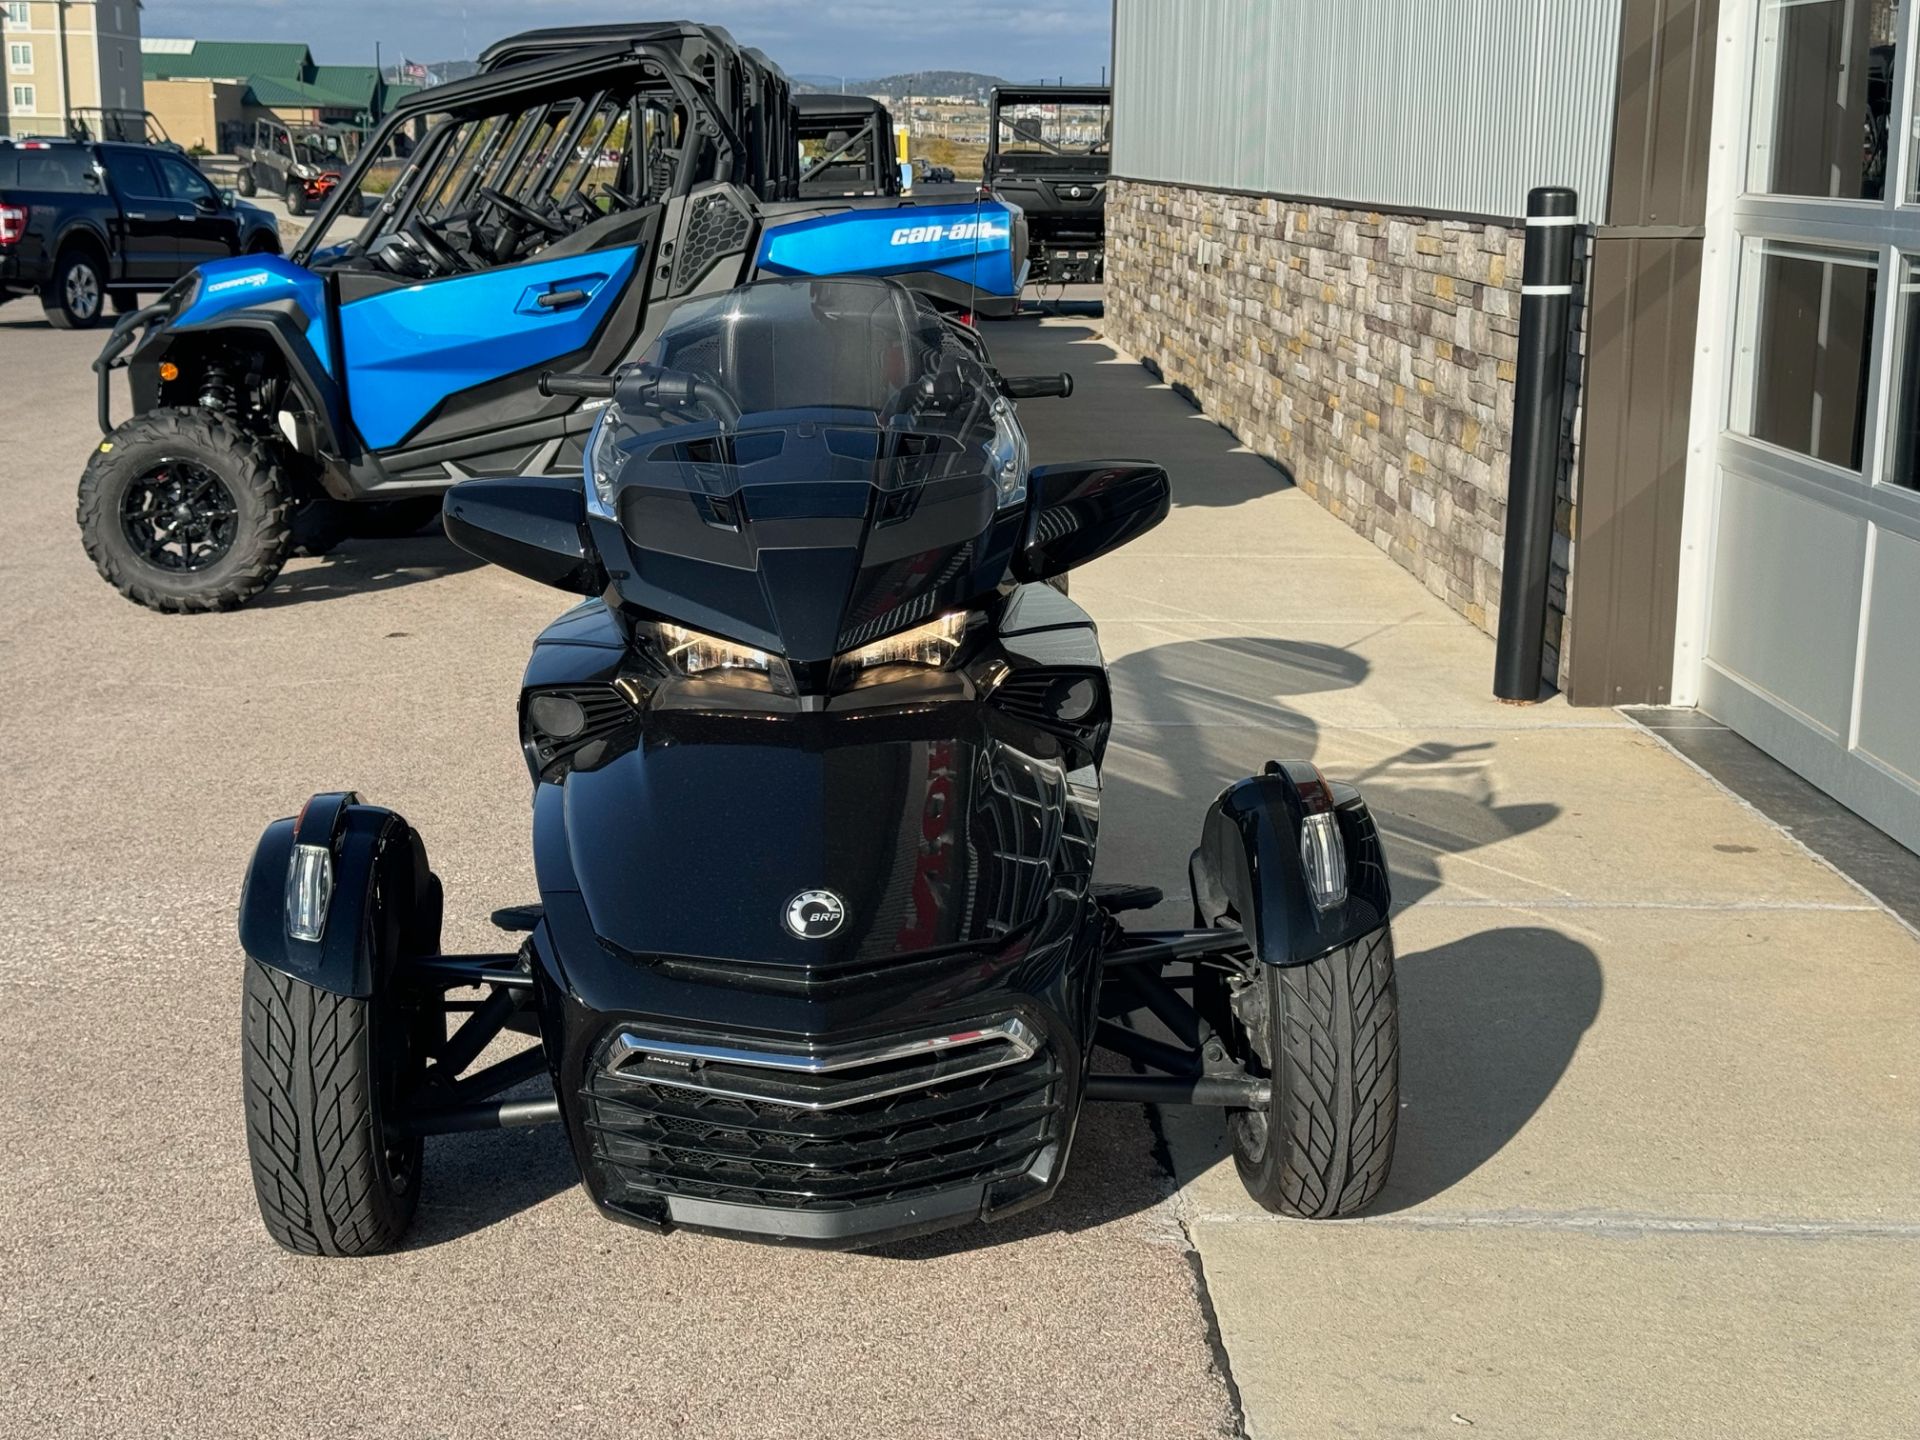 2020 Can-Am Spyder F3 Limited in Rapid City, South Dakota - Photo 3